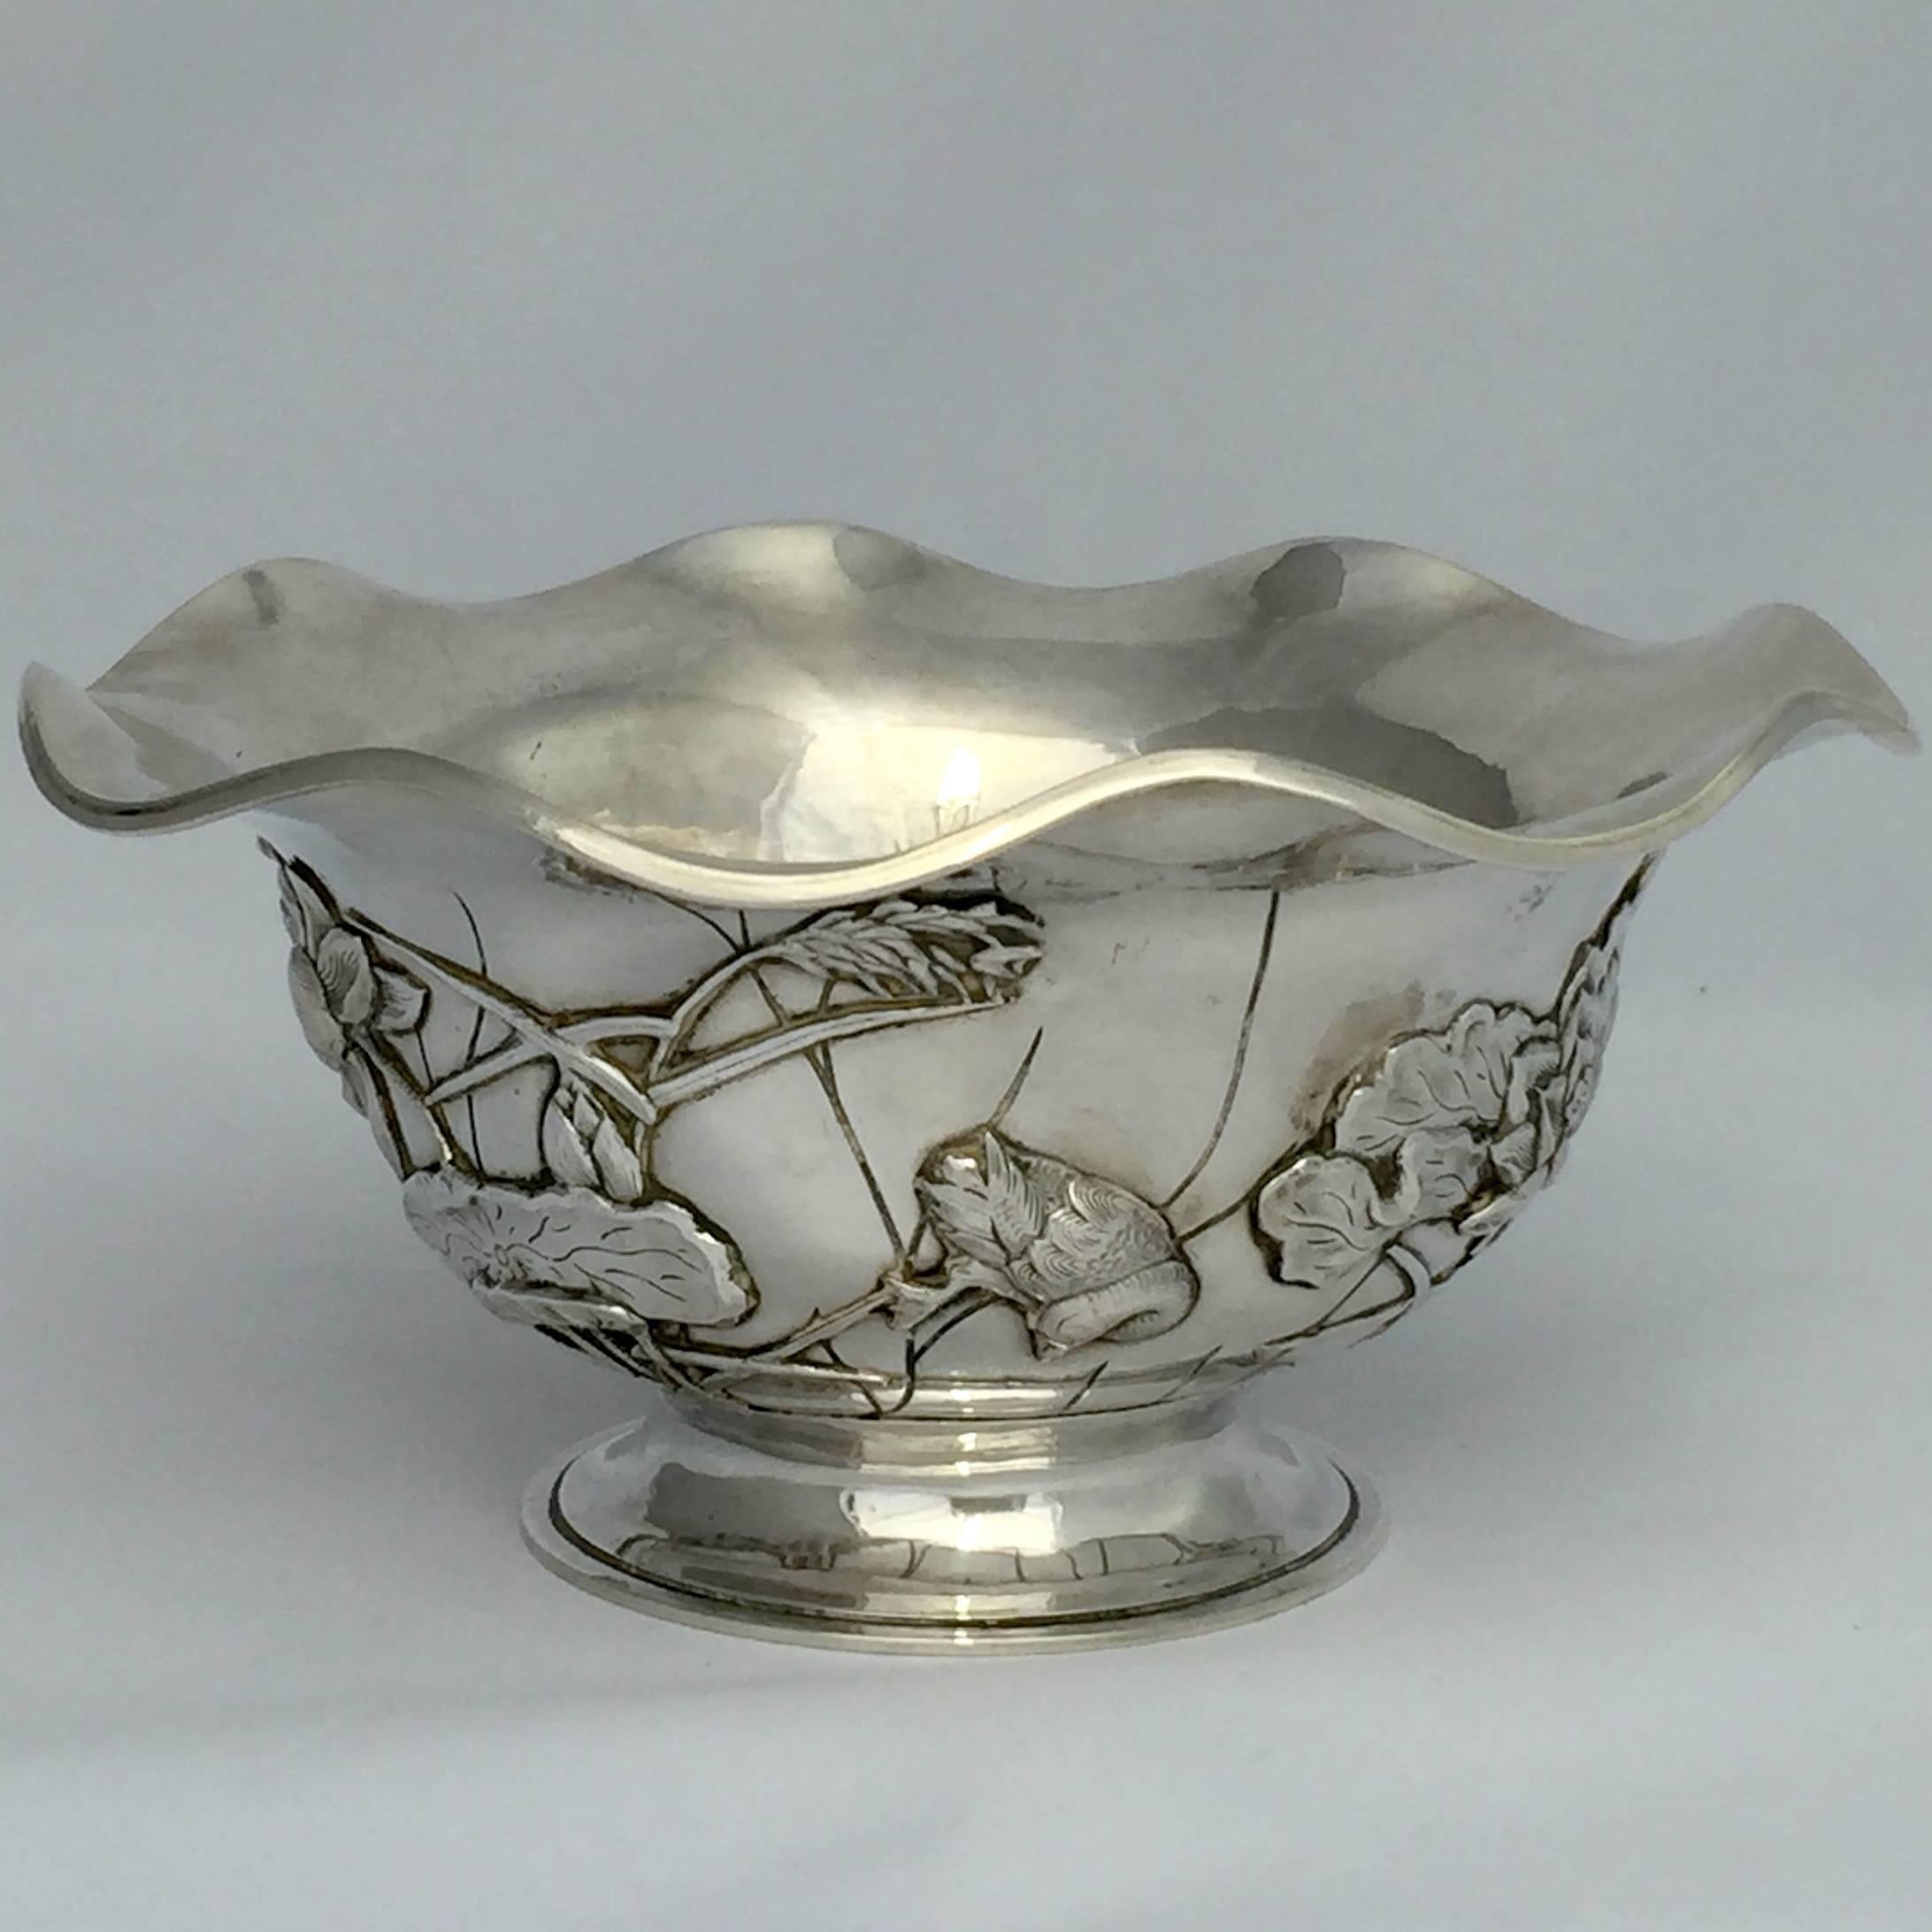 Art Nouveau Chinese Export Silver Bowl by Luen Wo with Lotus Detail